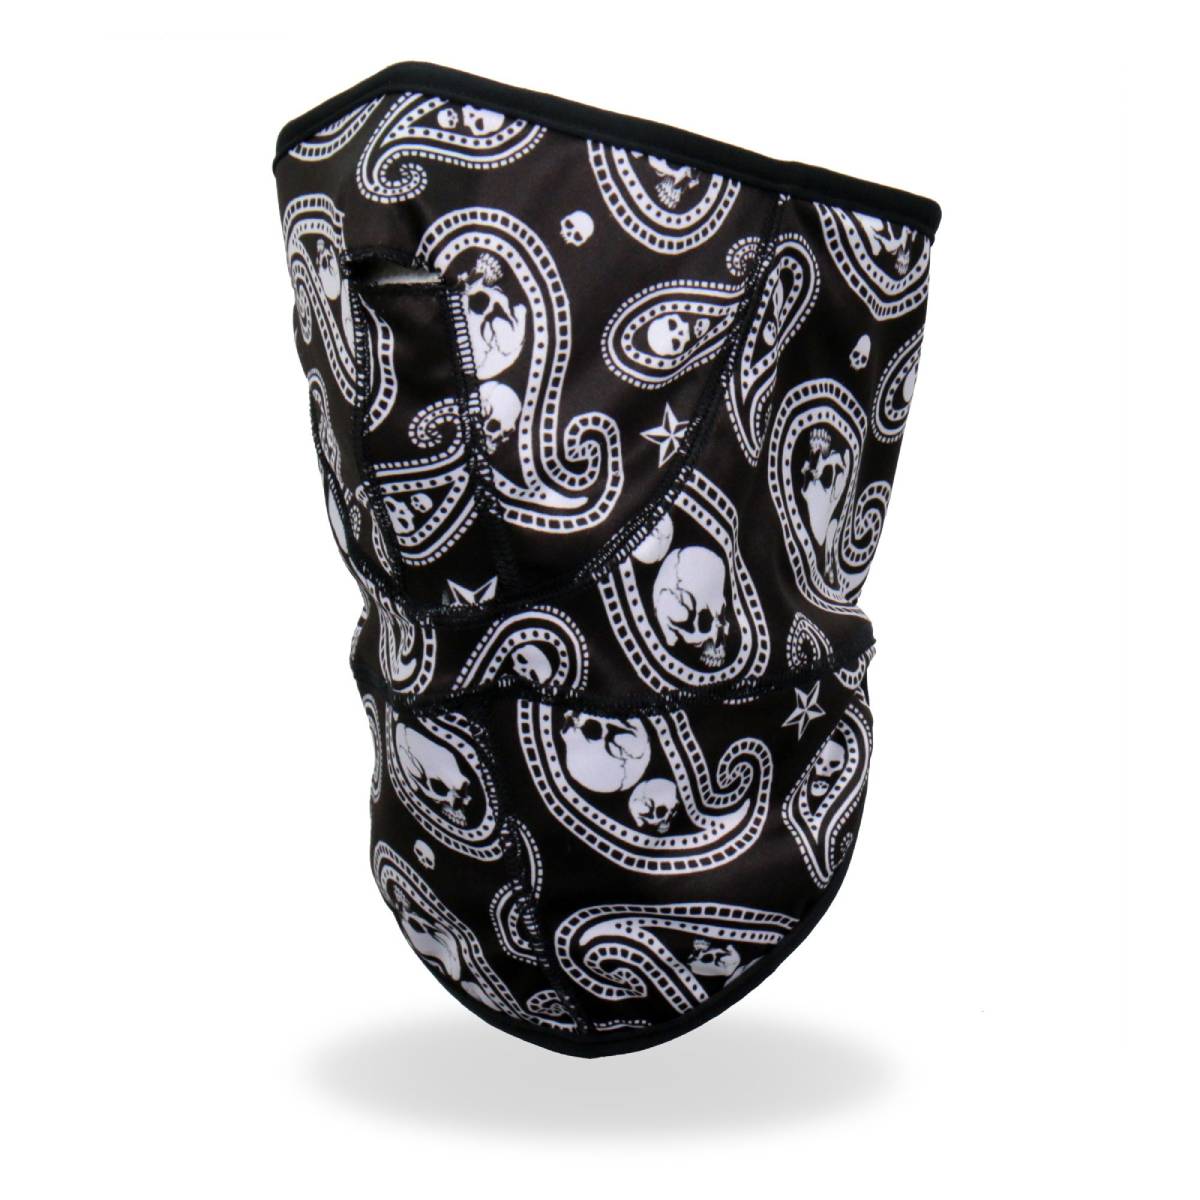 Hot Leathers FWC2005 Paisley Skull Face Wrap Neck Warmer